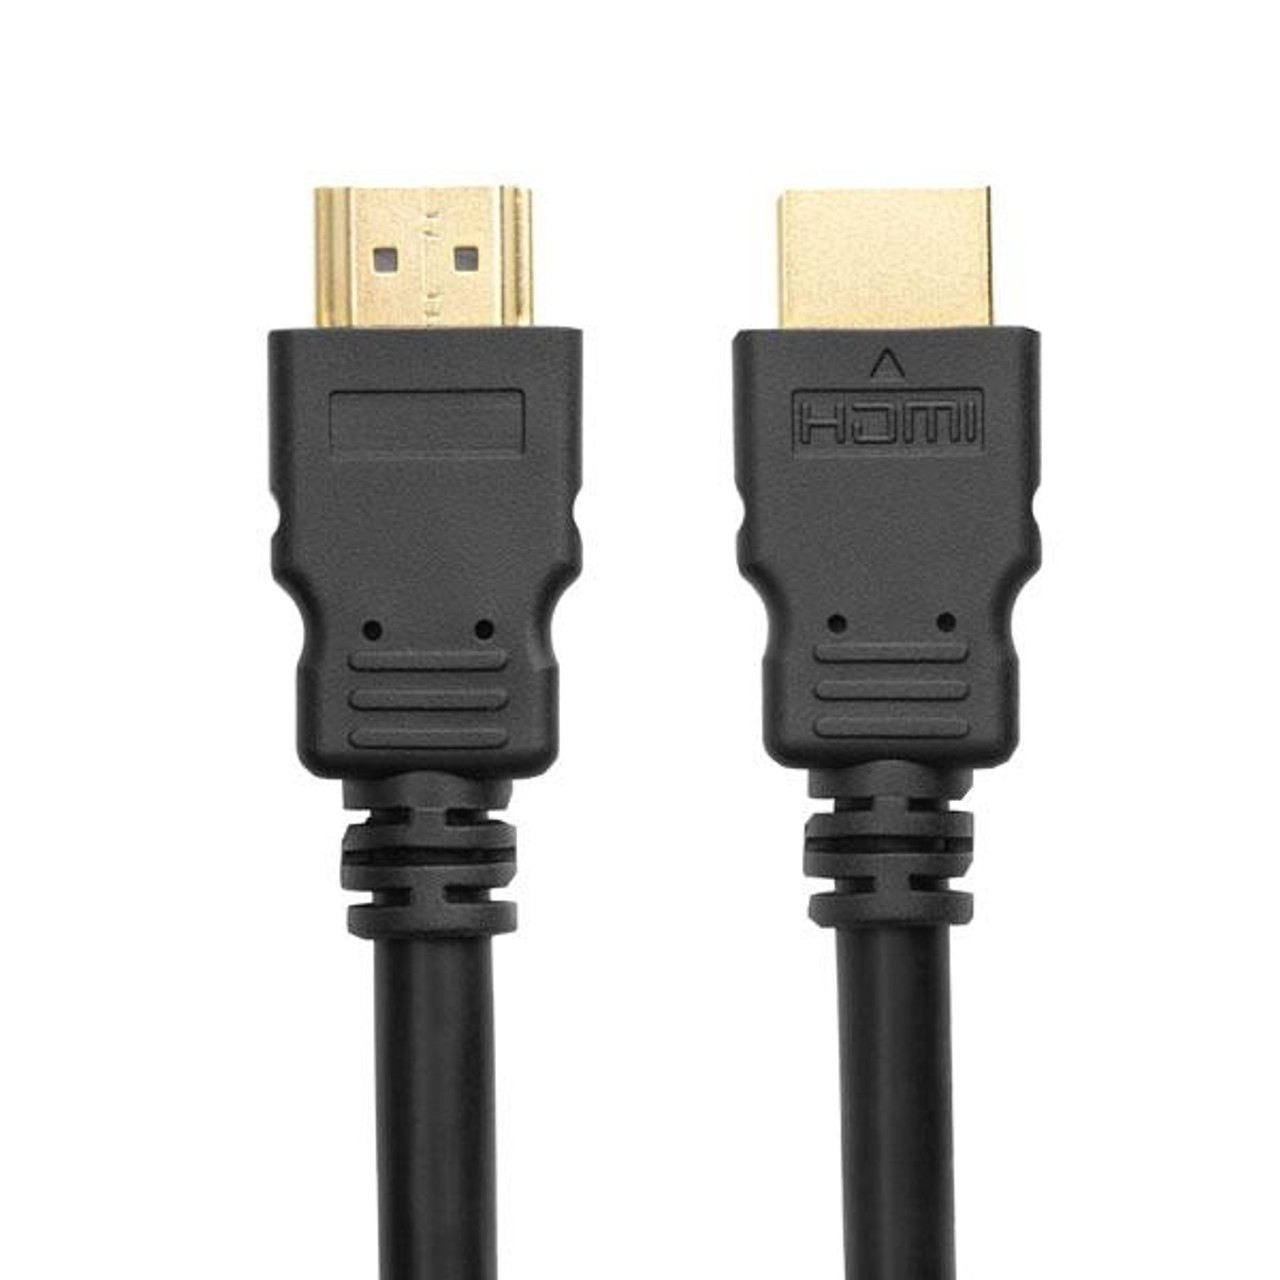 CABLE HDMI-2.0-V2.0 2 m - HDMI Cables up to 2 m Length - Delta